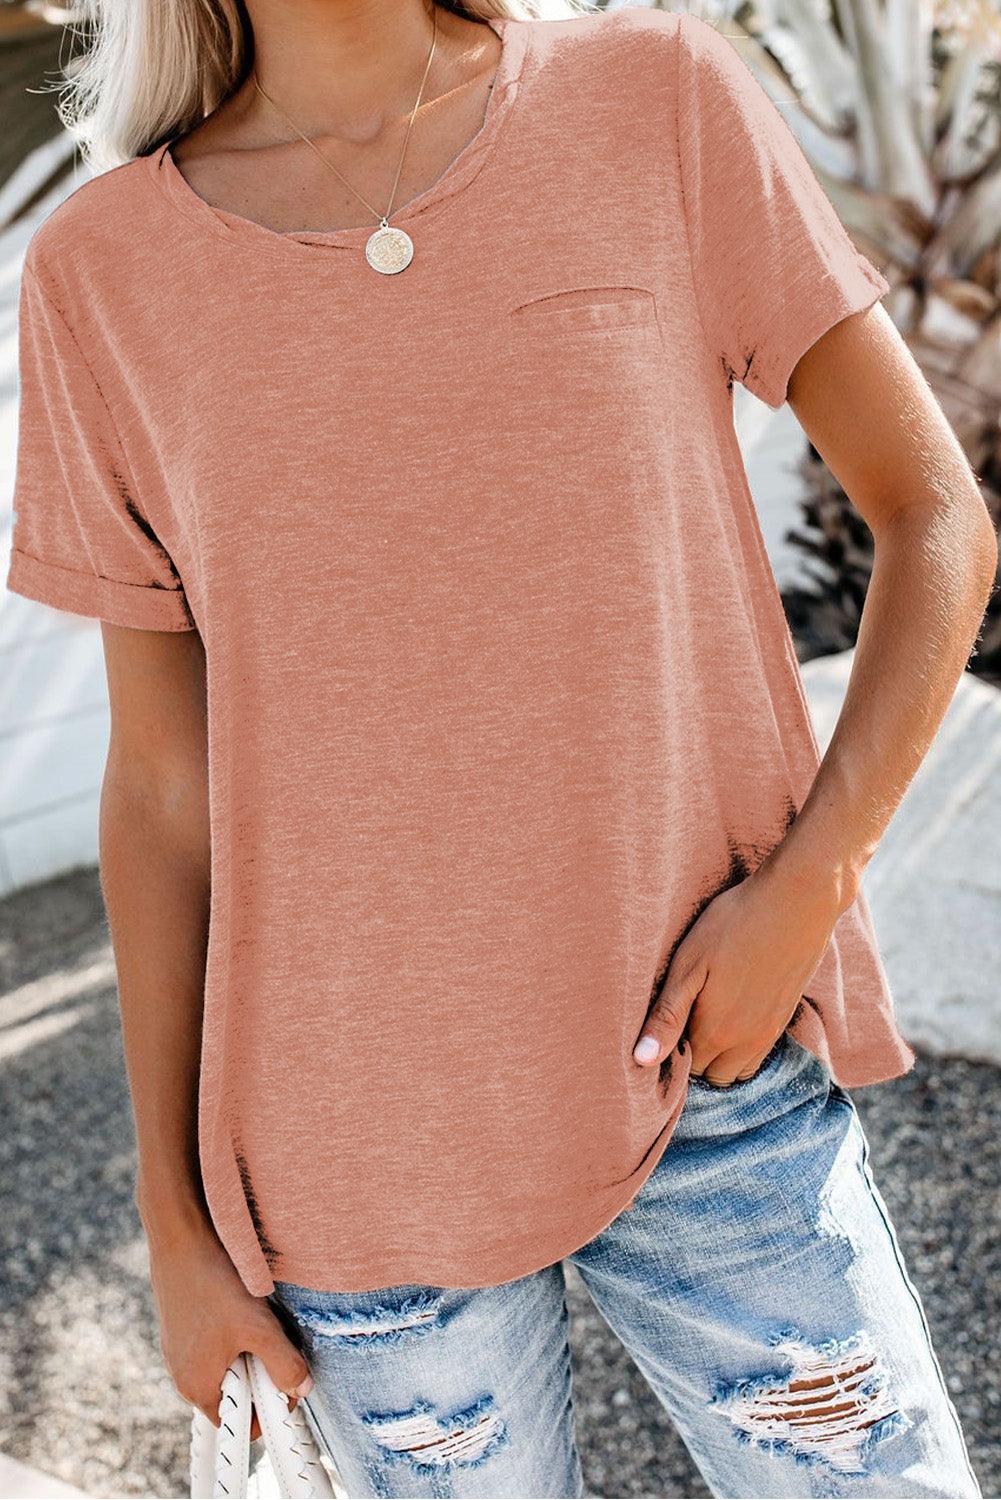 Solid Color Rolled Short Sleeve T Shirt - L & M Kee, LLC